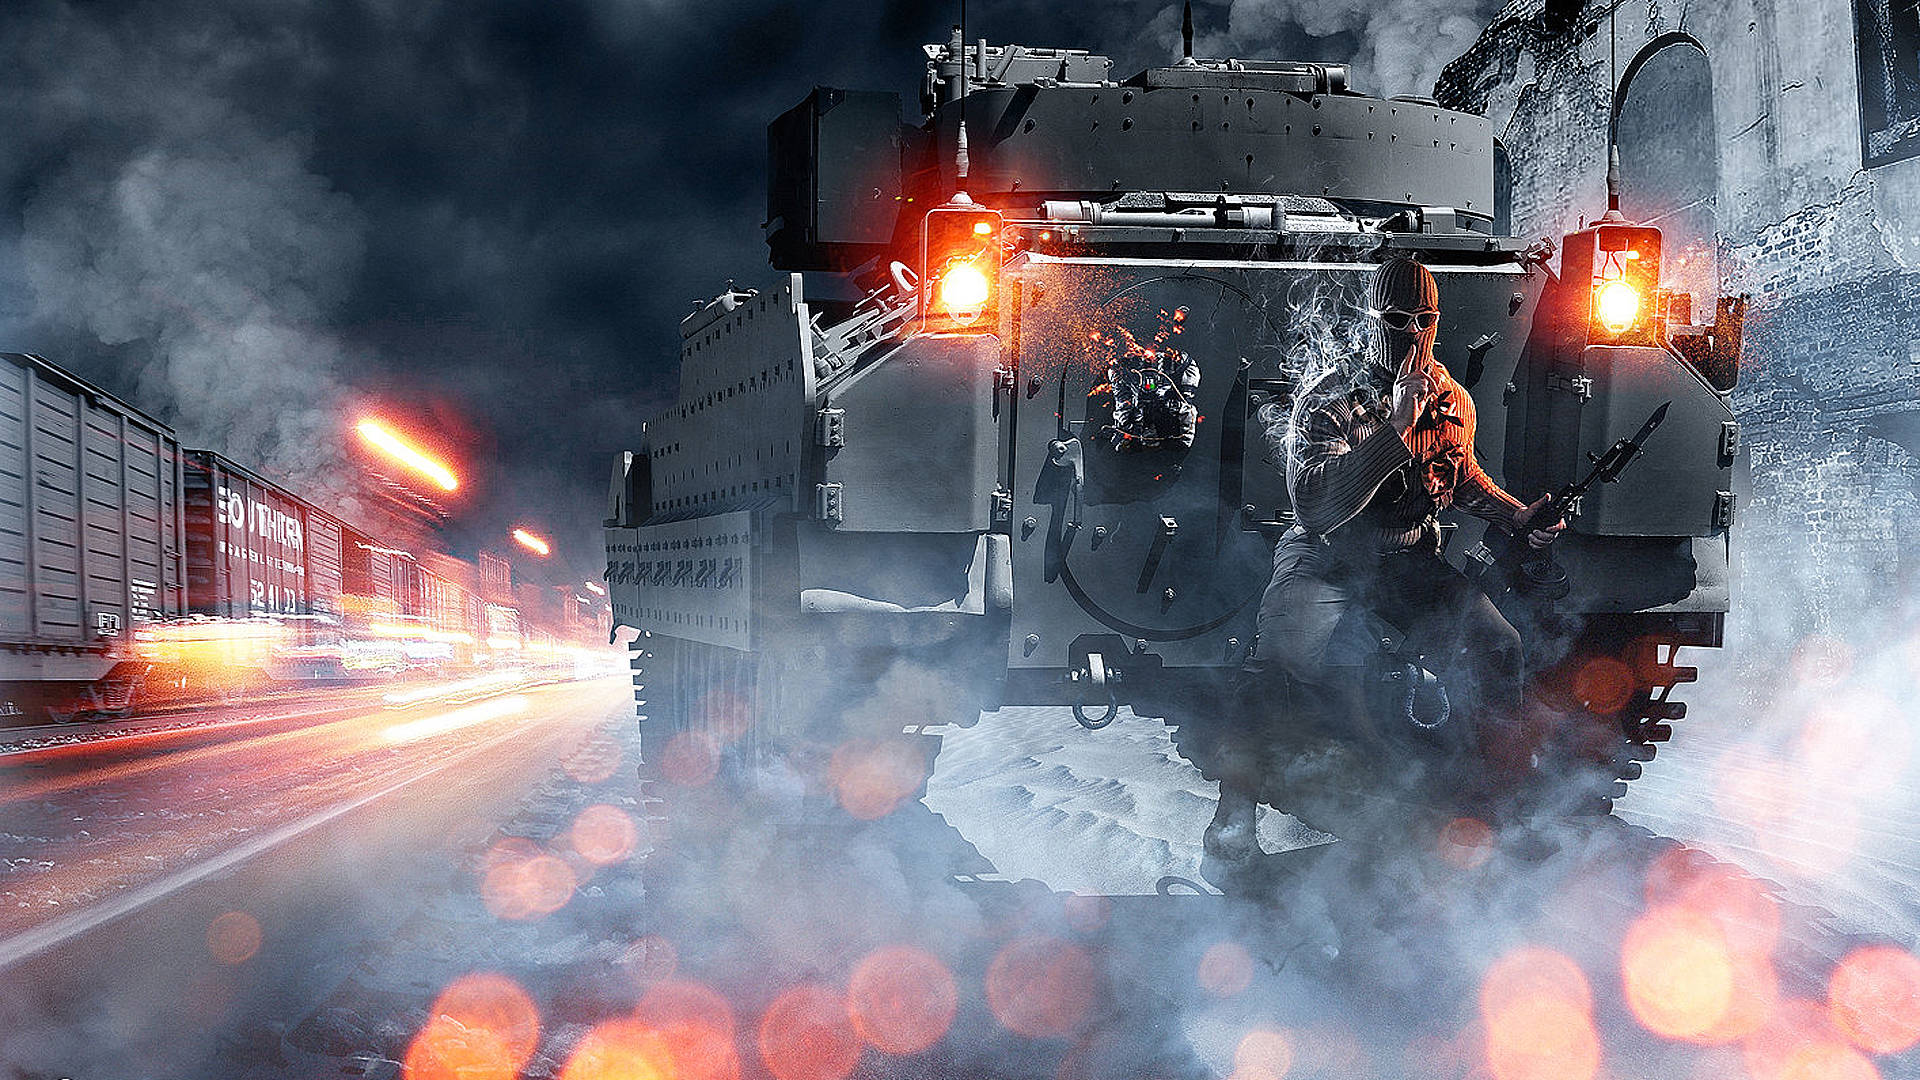 Explore the Ultimate War Zone with Cool Battlefield 3 Wallpaper